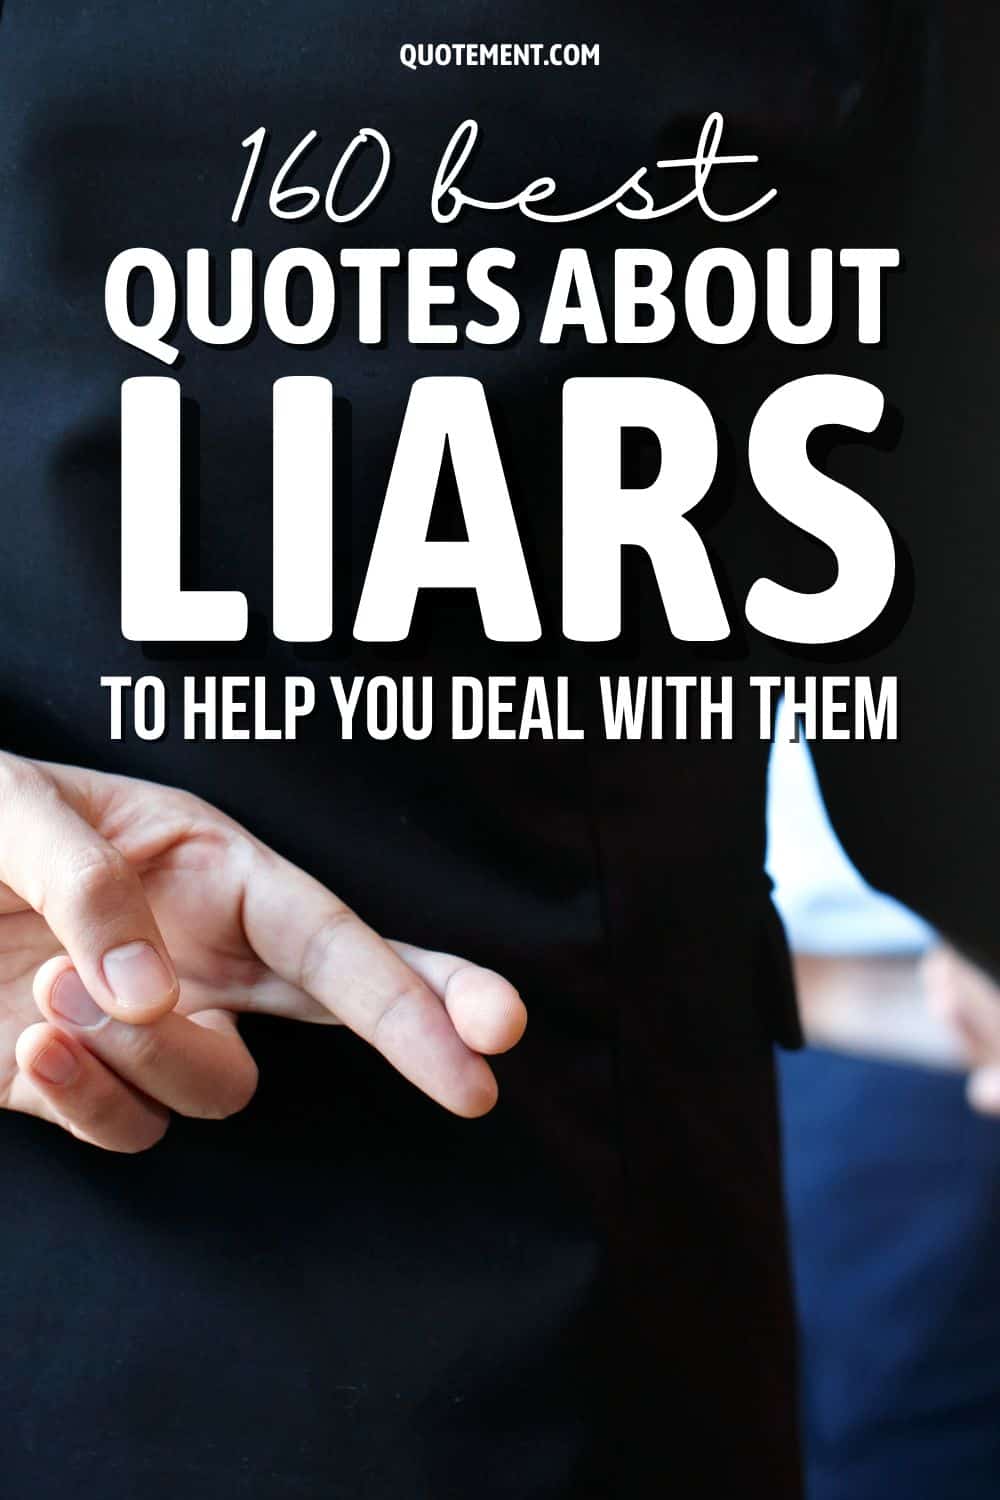 160 Best Quotes About Liars To Help You Deal With Them
